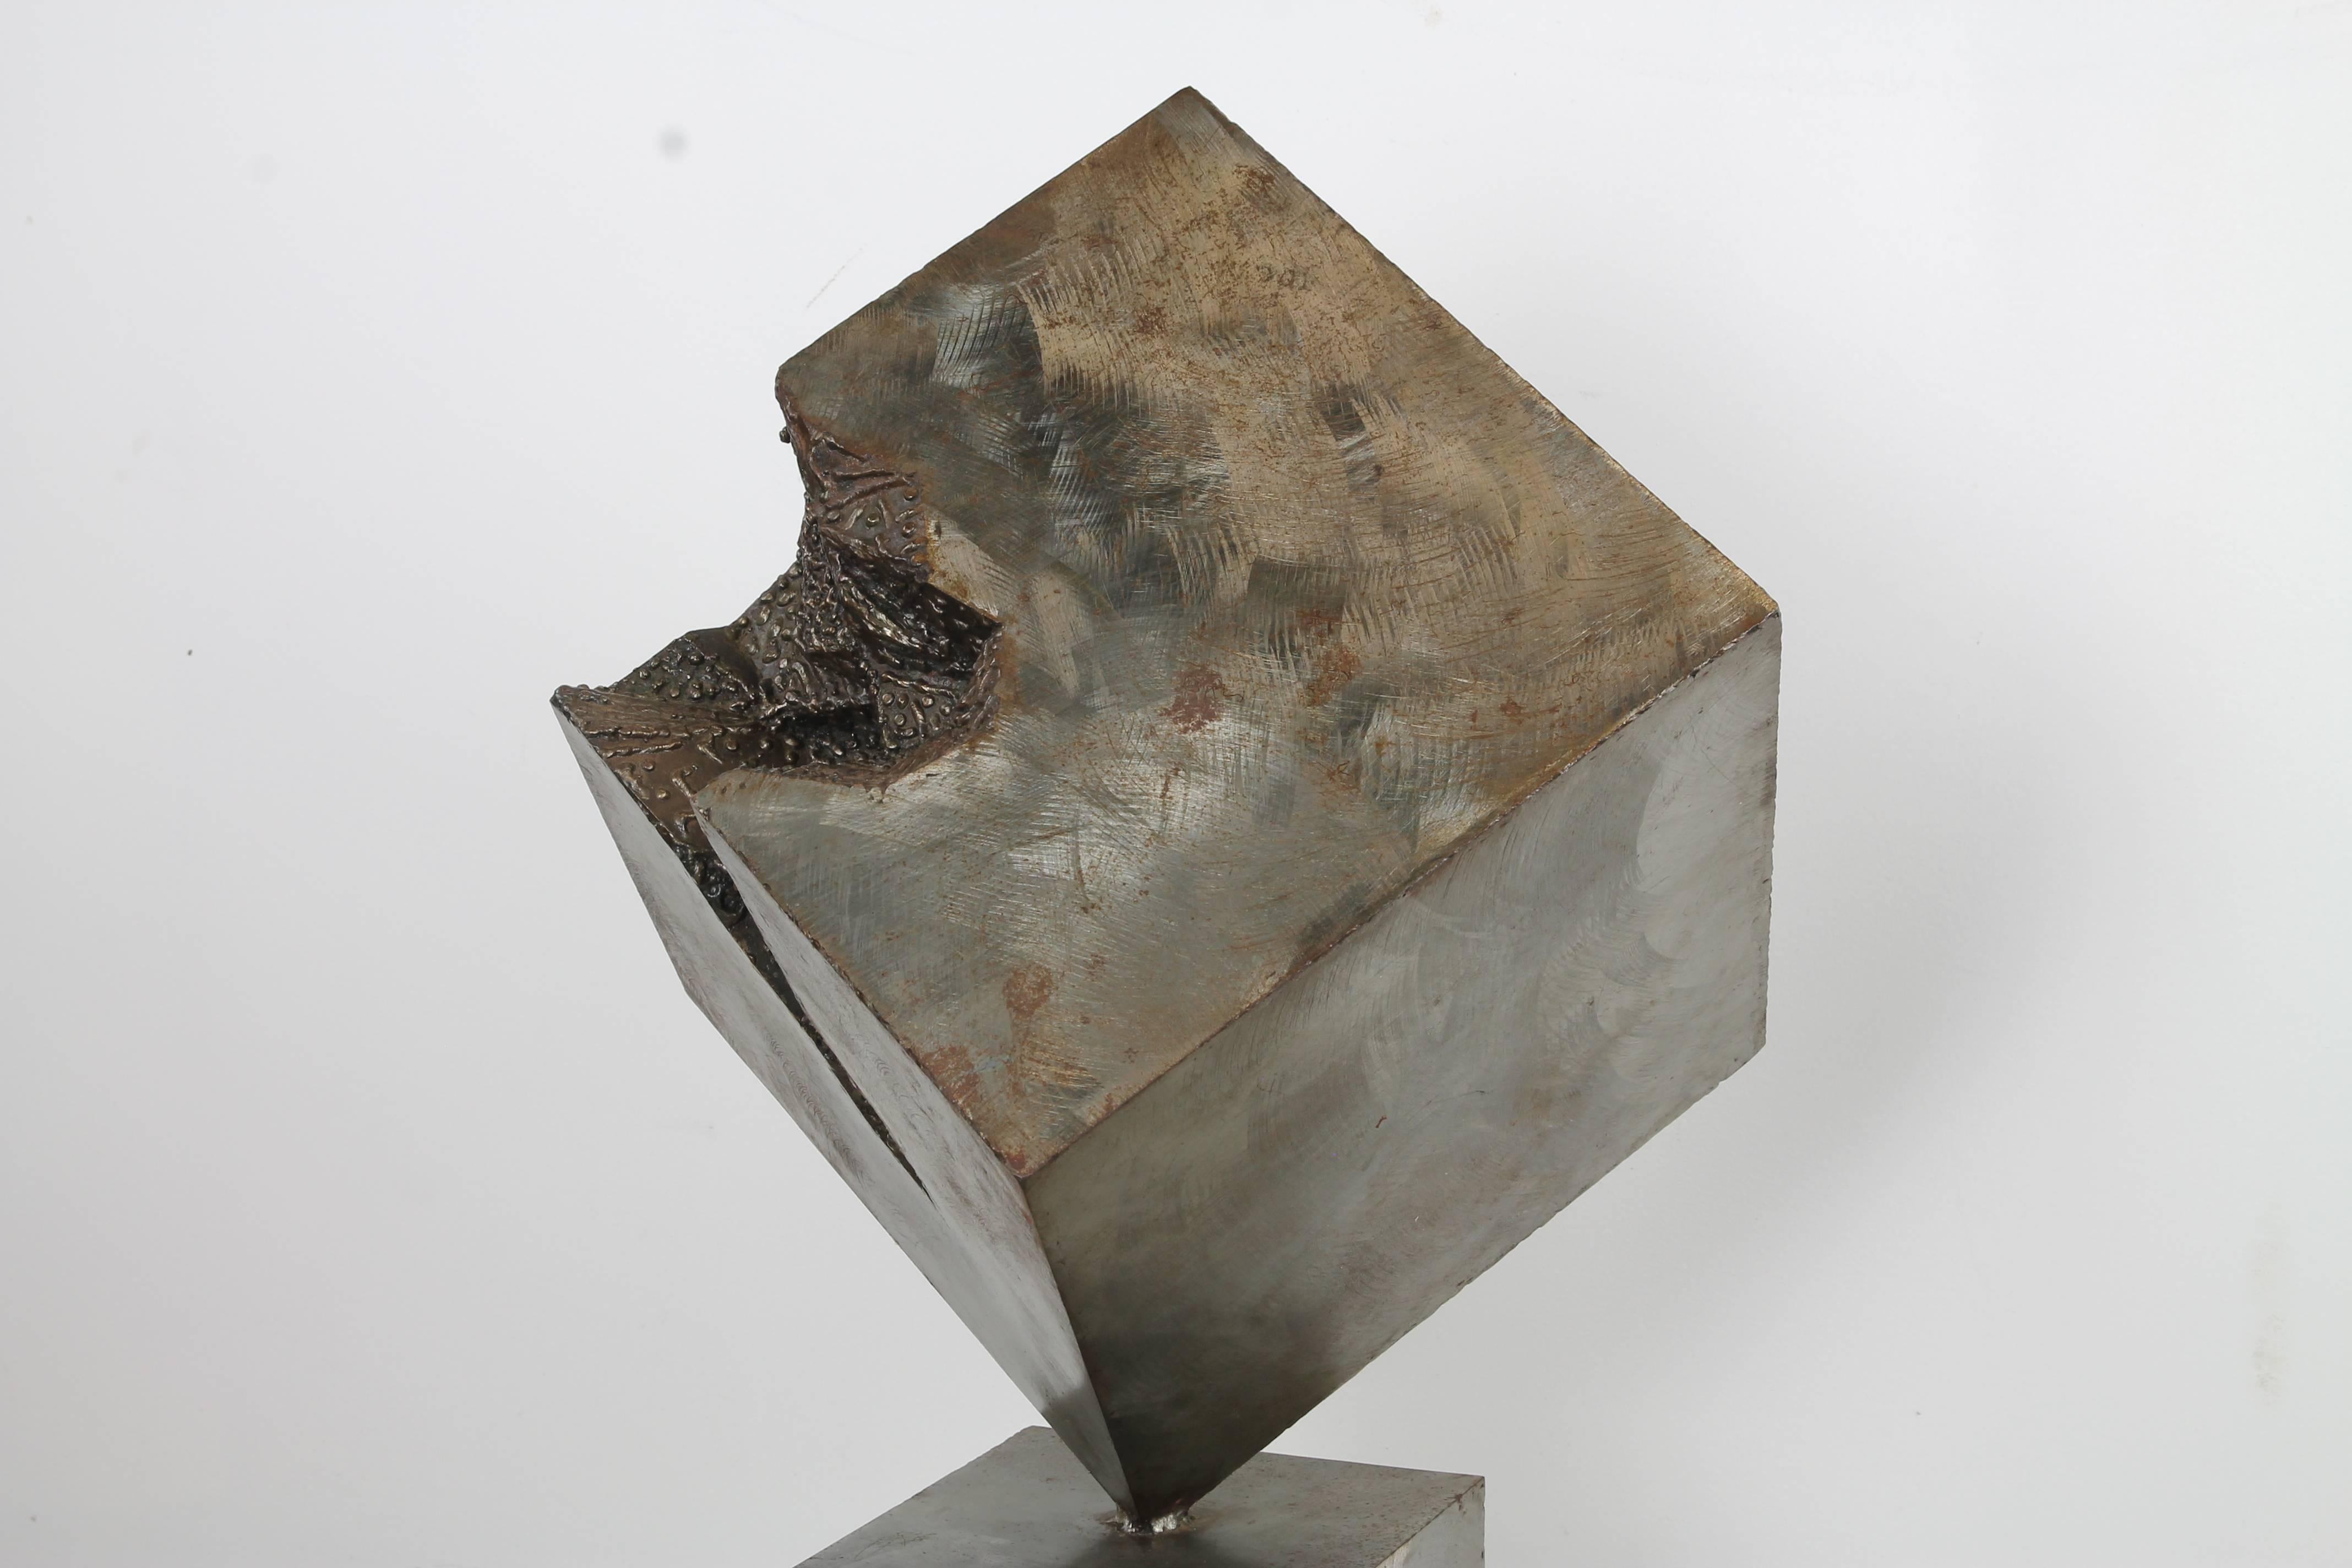 A monolith sculpture in Brutalist tradition, comprised of a skewed steel cube with crater hole in corner, atop a rectangular steel pedestal. Signed 'Ladd' at base.